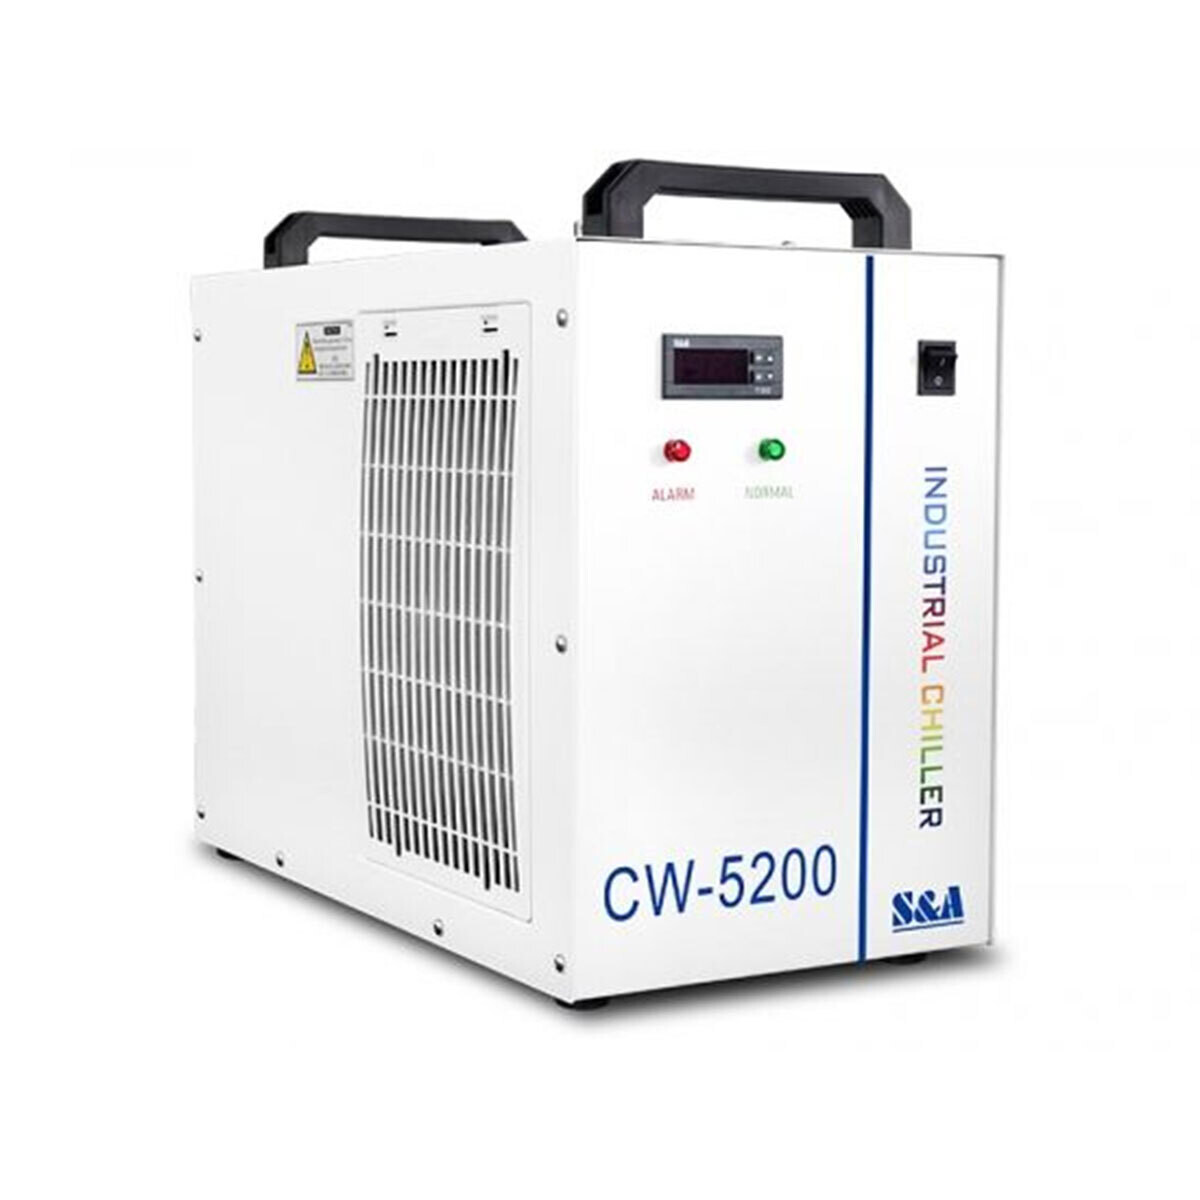 CW-5200 Chiller